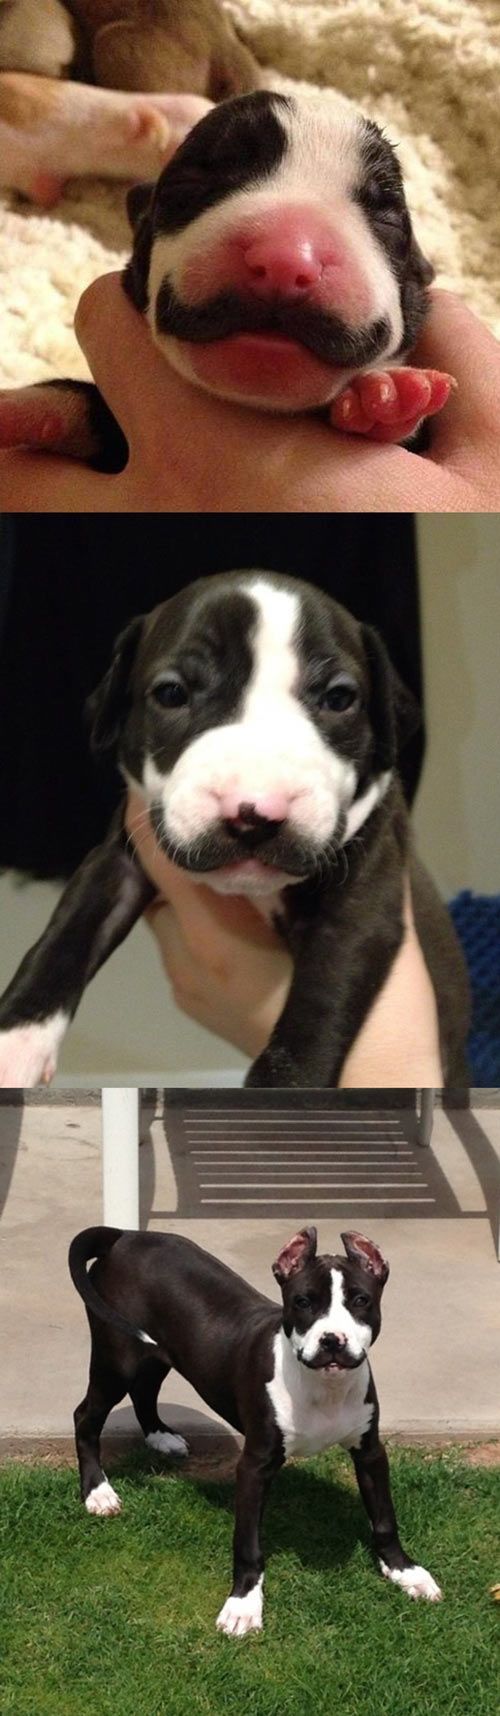 12 Unbelievable Photos of Dogs Who Have Mustaches [MUST SEE]